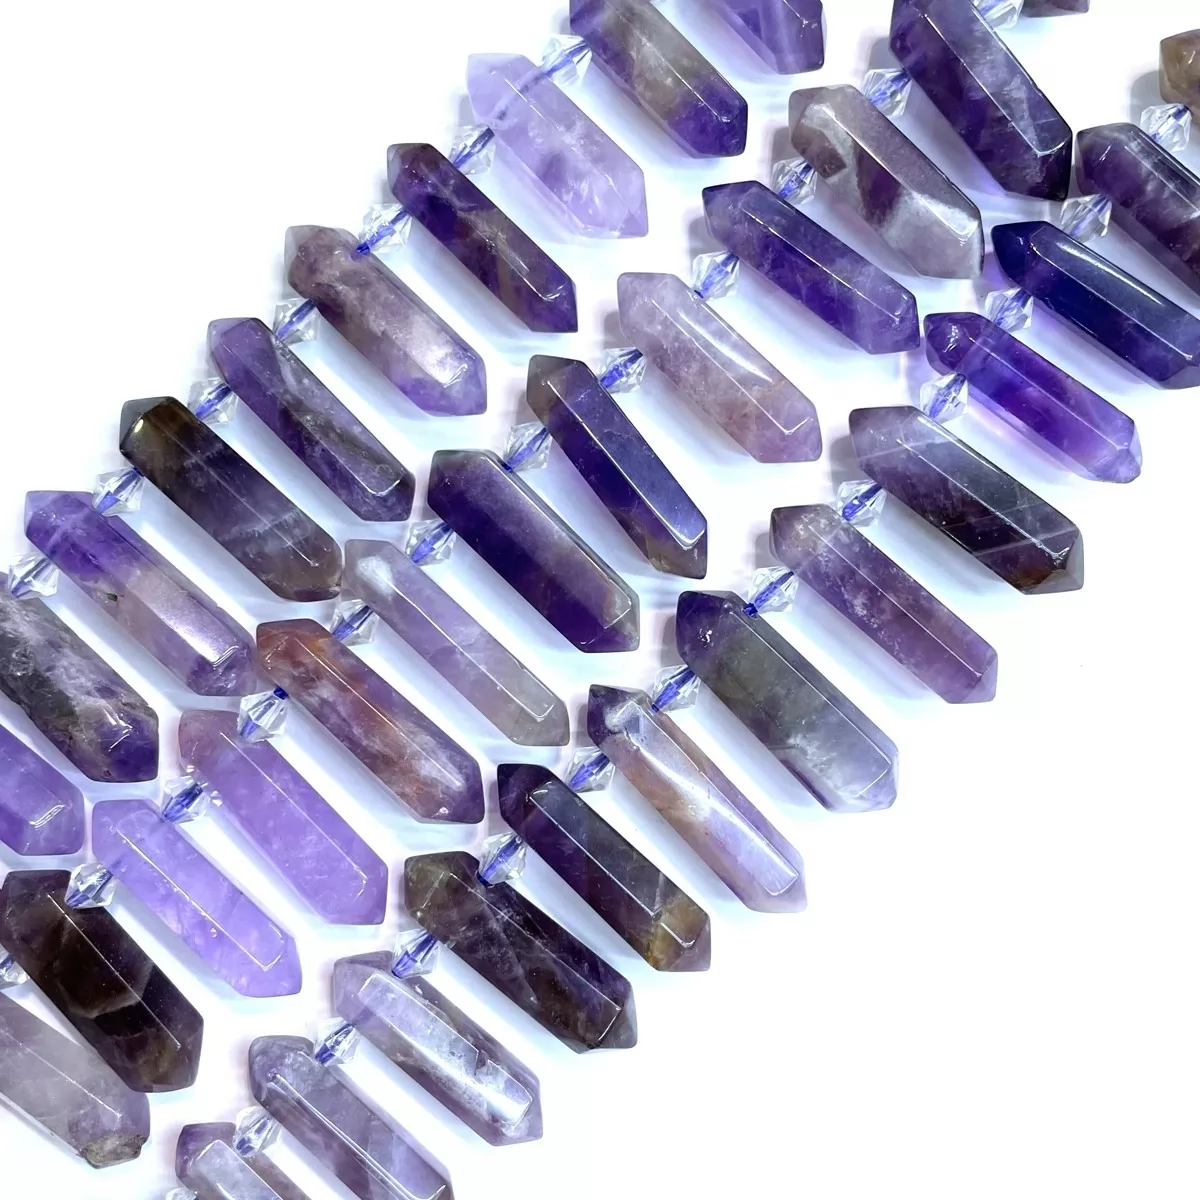 Chevon Amethyst, Graduated Top side drilled point , Approx 8-10mm x 30-40mm, Approx 25pcs